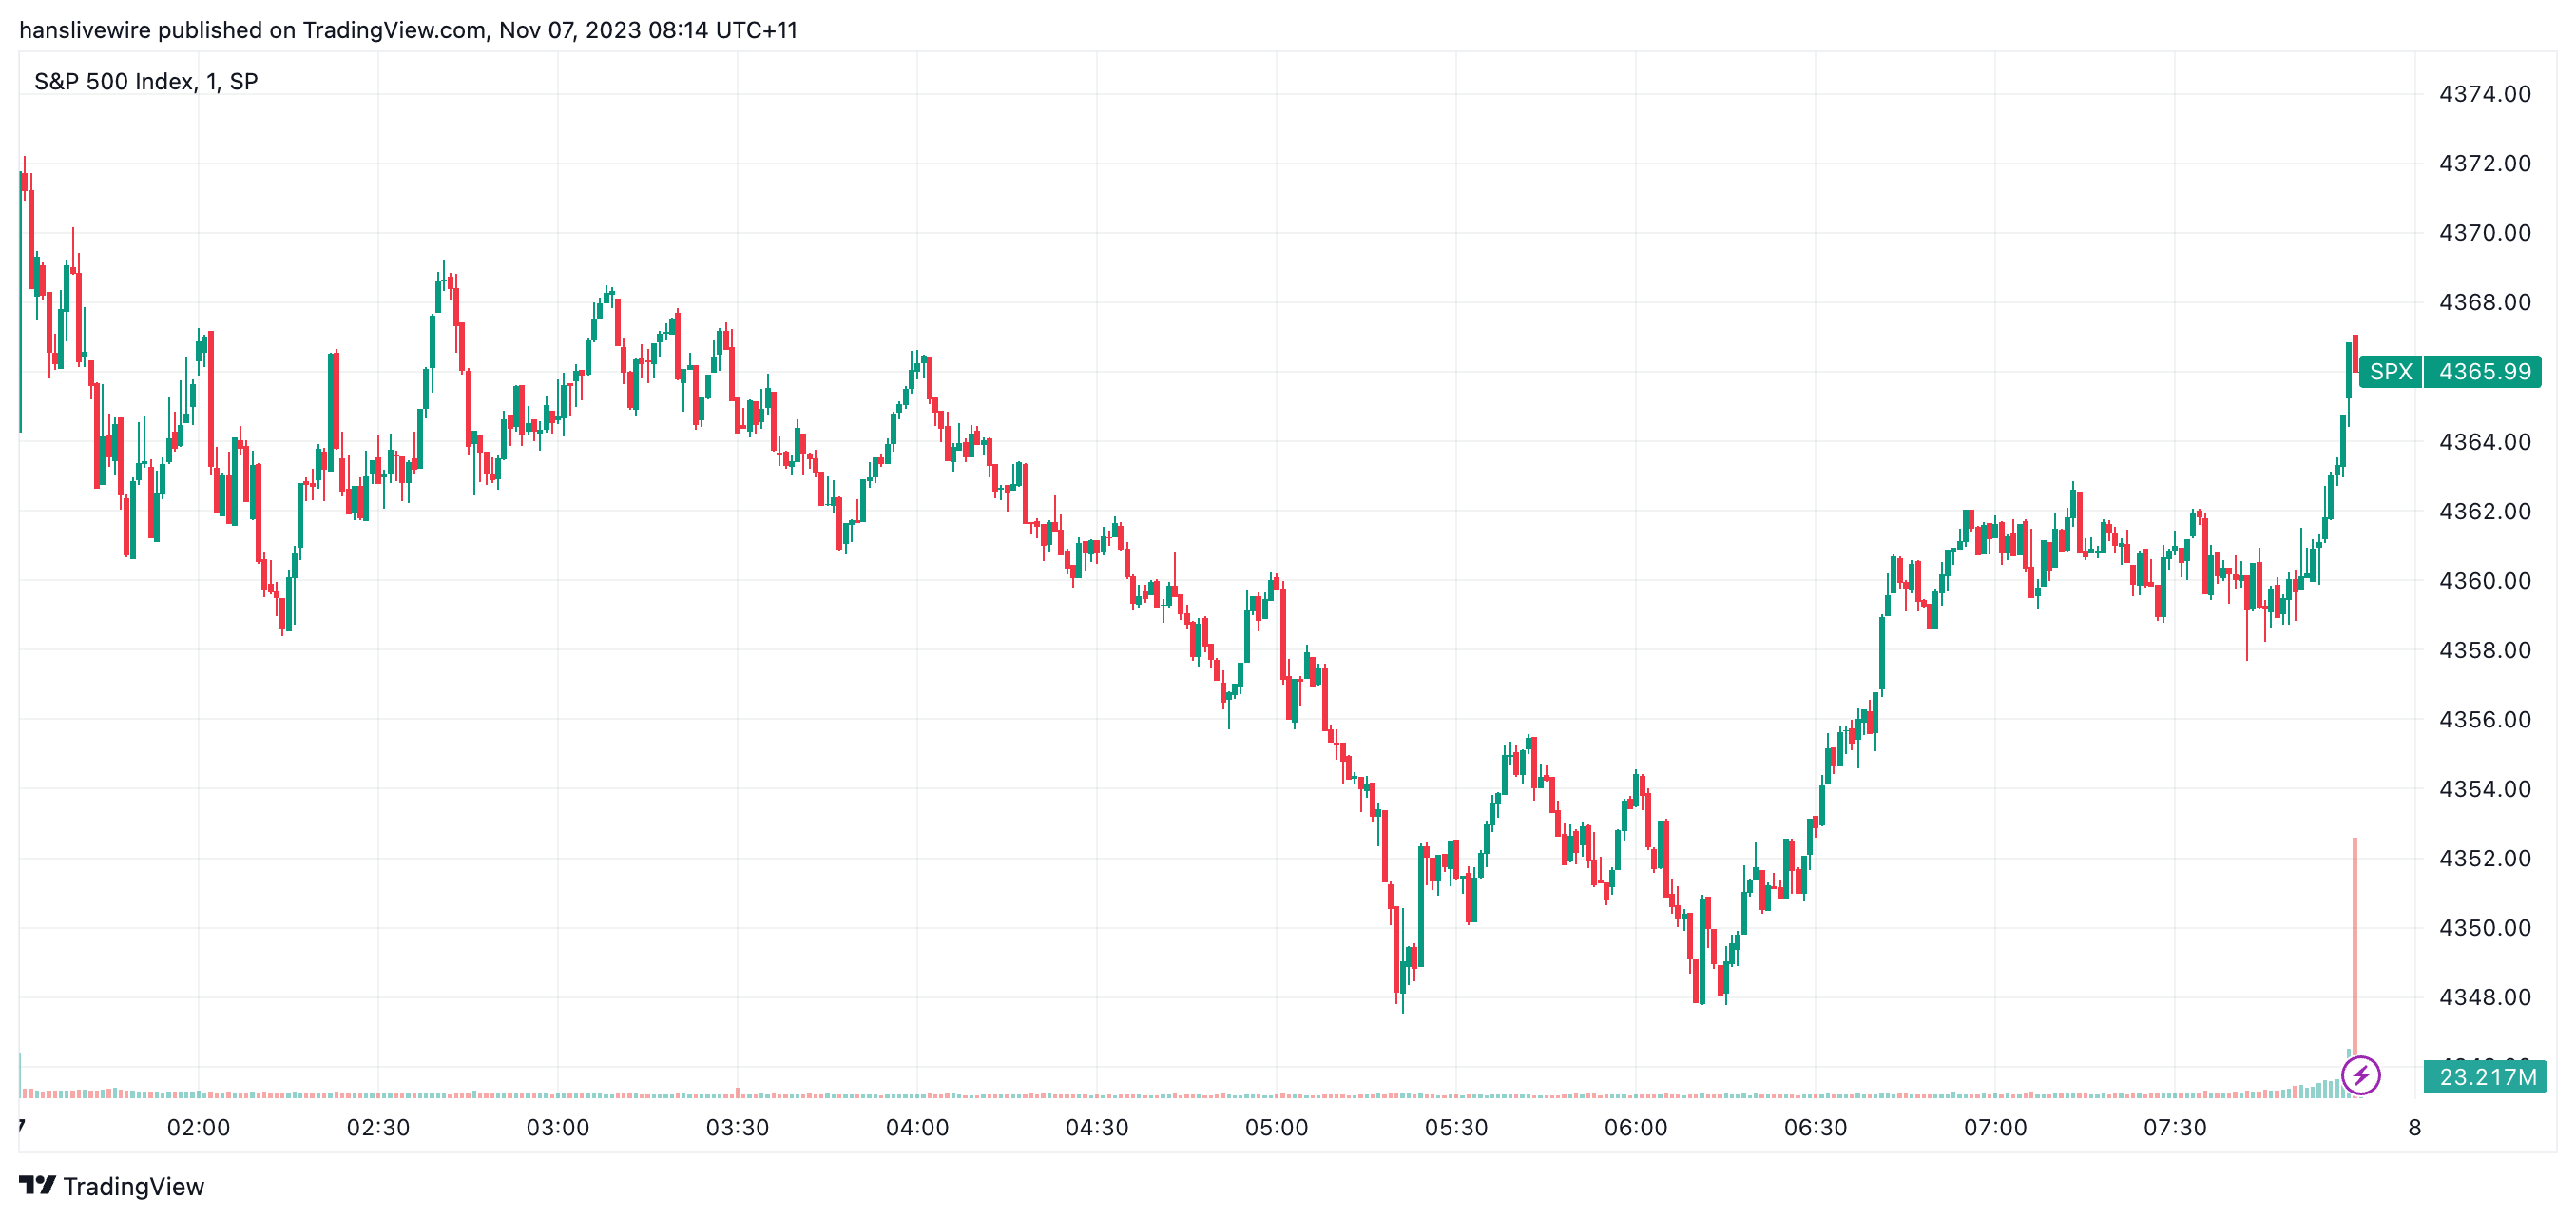 A late day rally gets the S&P 500 over the line - just. (Source: TradingView)